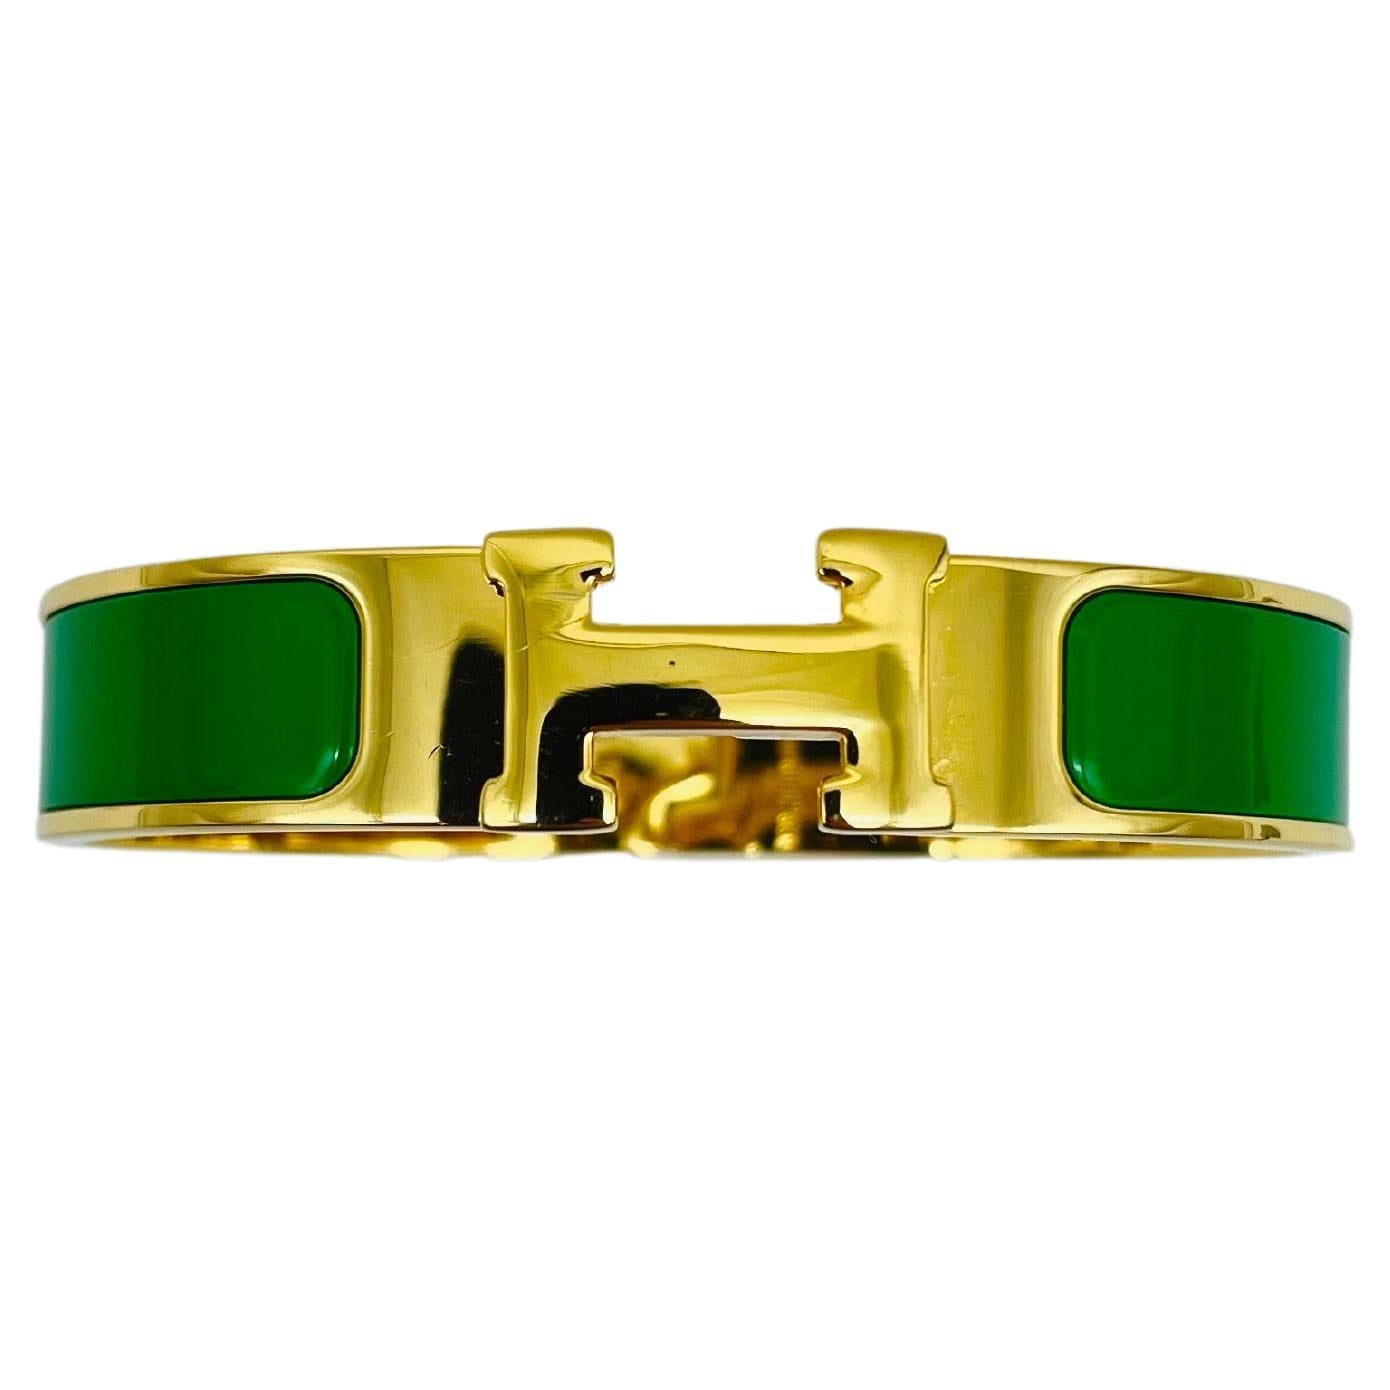 Unisex HERMES clic clac H green/ yeloow gold bangle

Hermes Clic H Bangle
Very intense green enamel on yellow gold
Worn few times
Very rare color combination, very hard to find.
Without box

